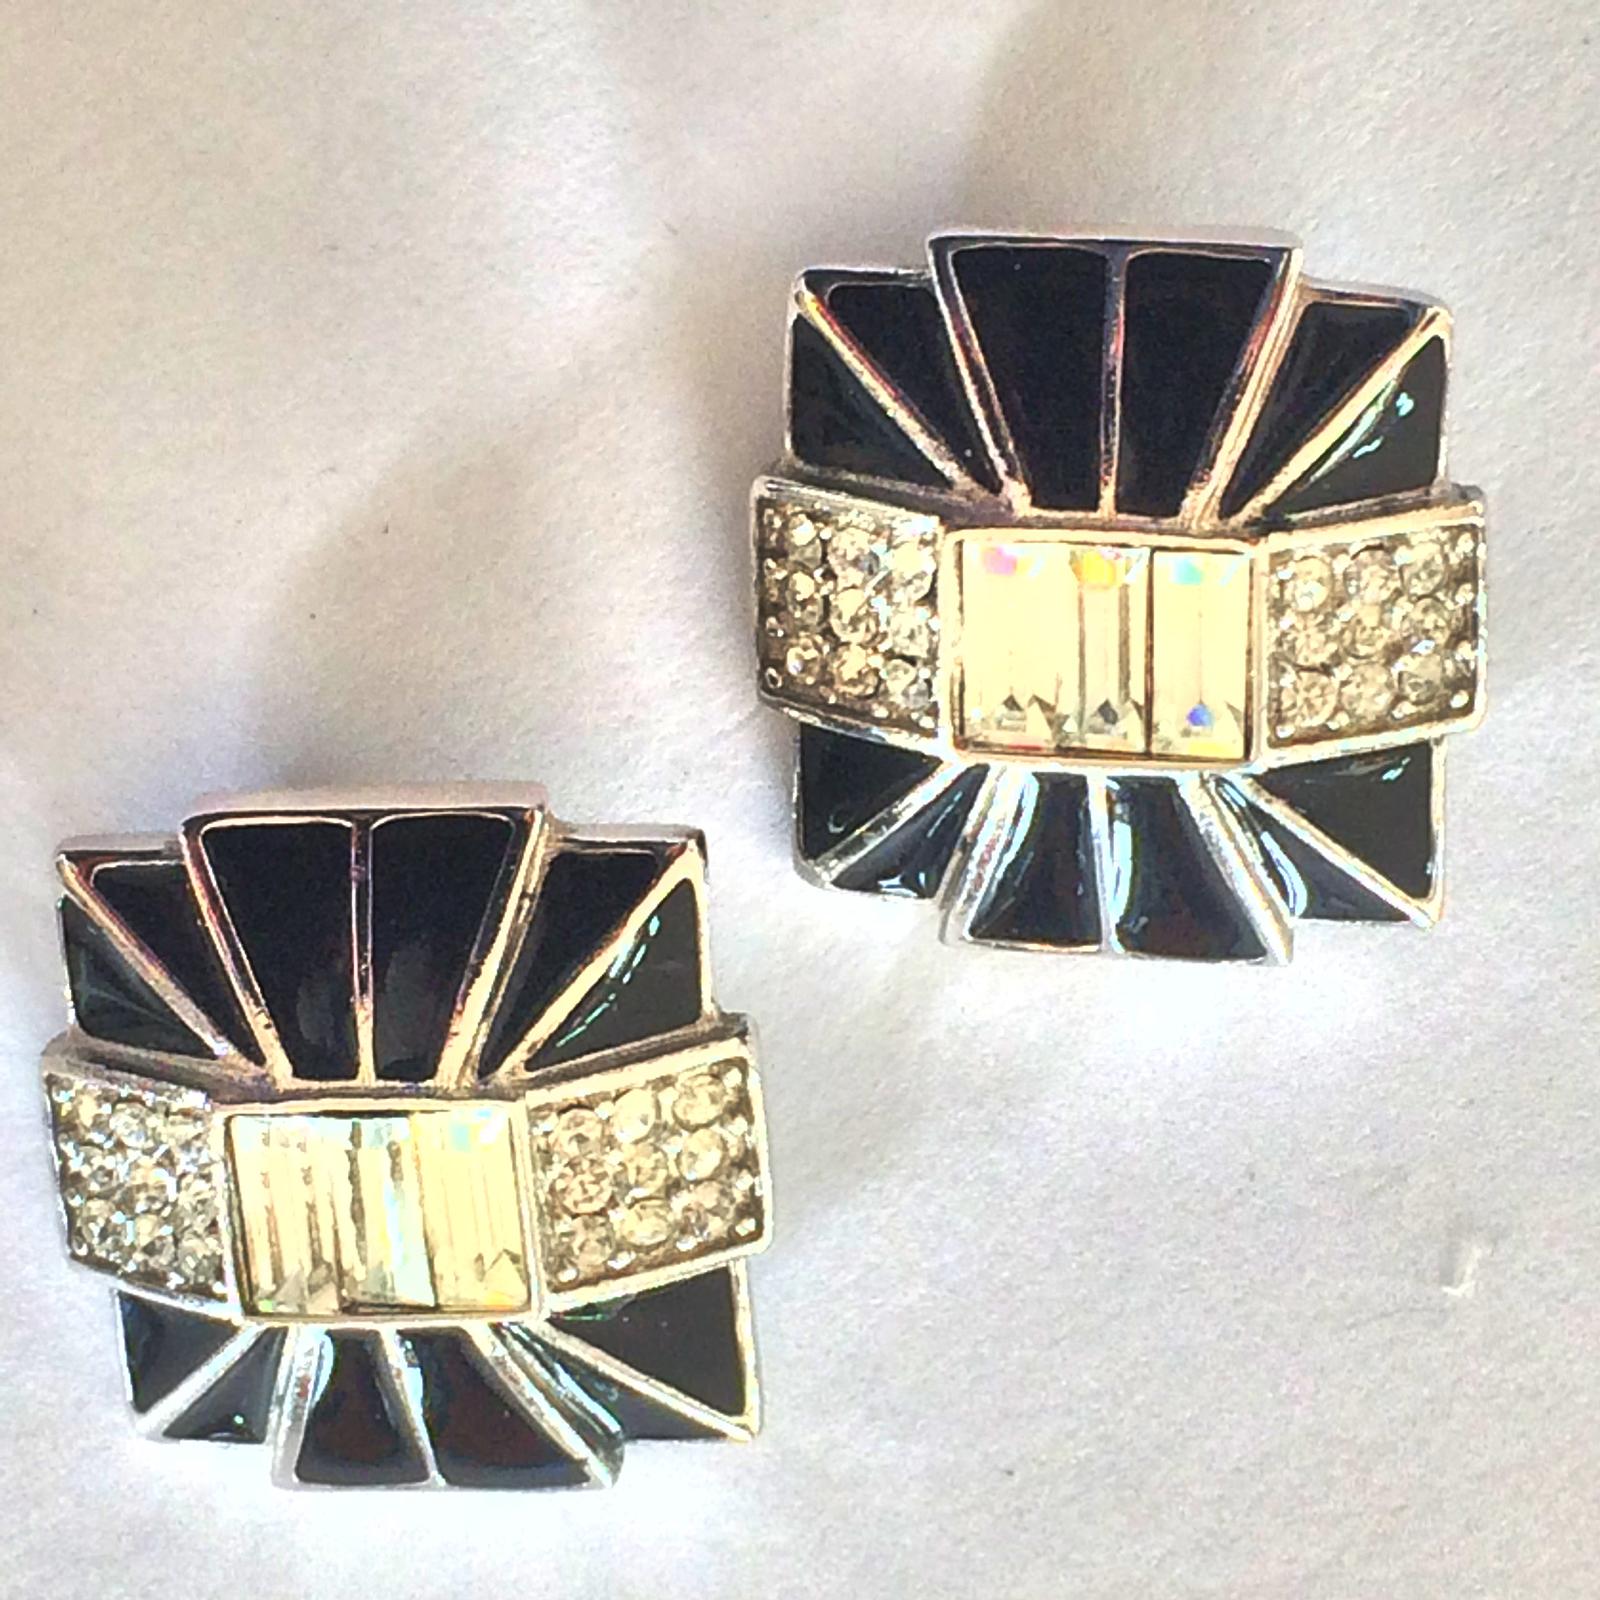 Art Deco Revival Clip Earrings Style by Givenchy PARIS and NEW YORK as marked to the rear. The face is in silver tones with Geometric black wedges of enamel within, surrounding central 3 Baguette cut Diamantes, with 3 x 3 brilliant white Diamantes